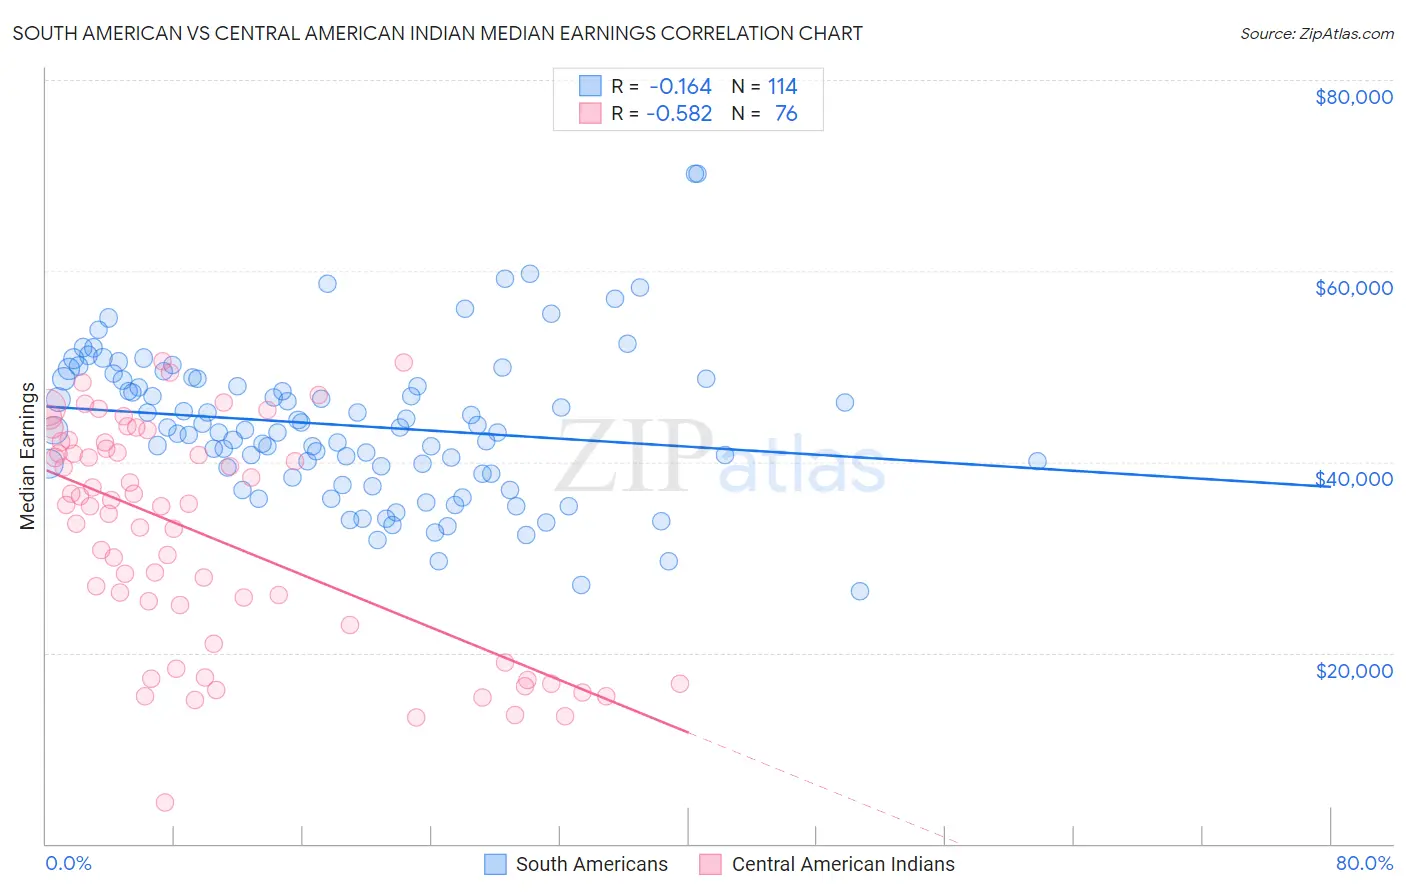 South American vs Central American Indian Median Earnings